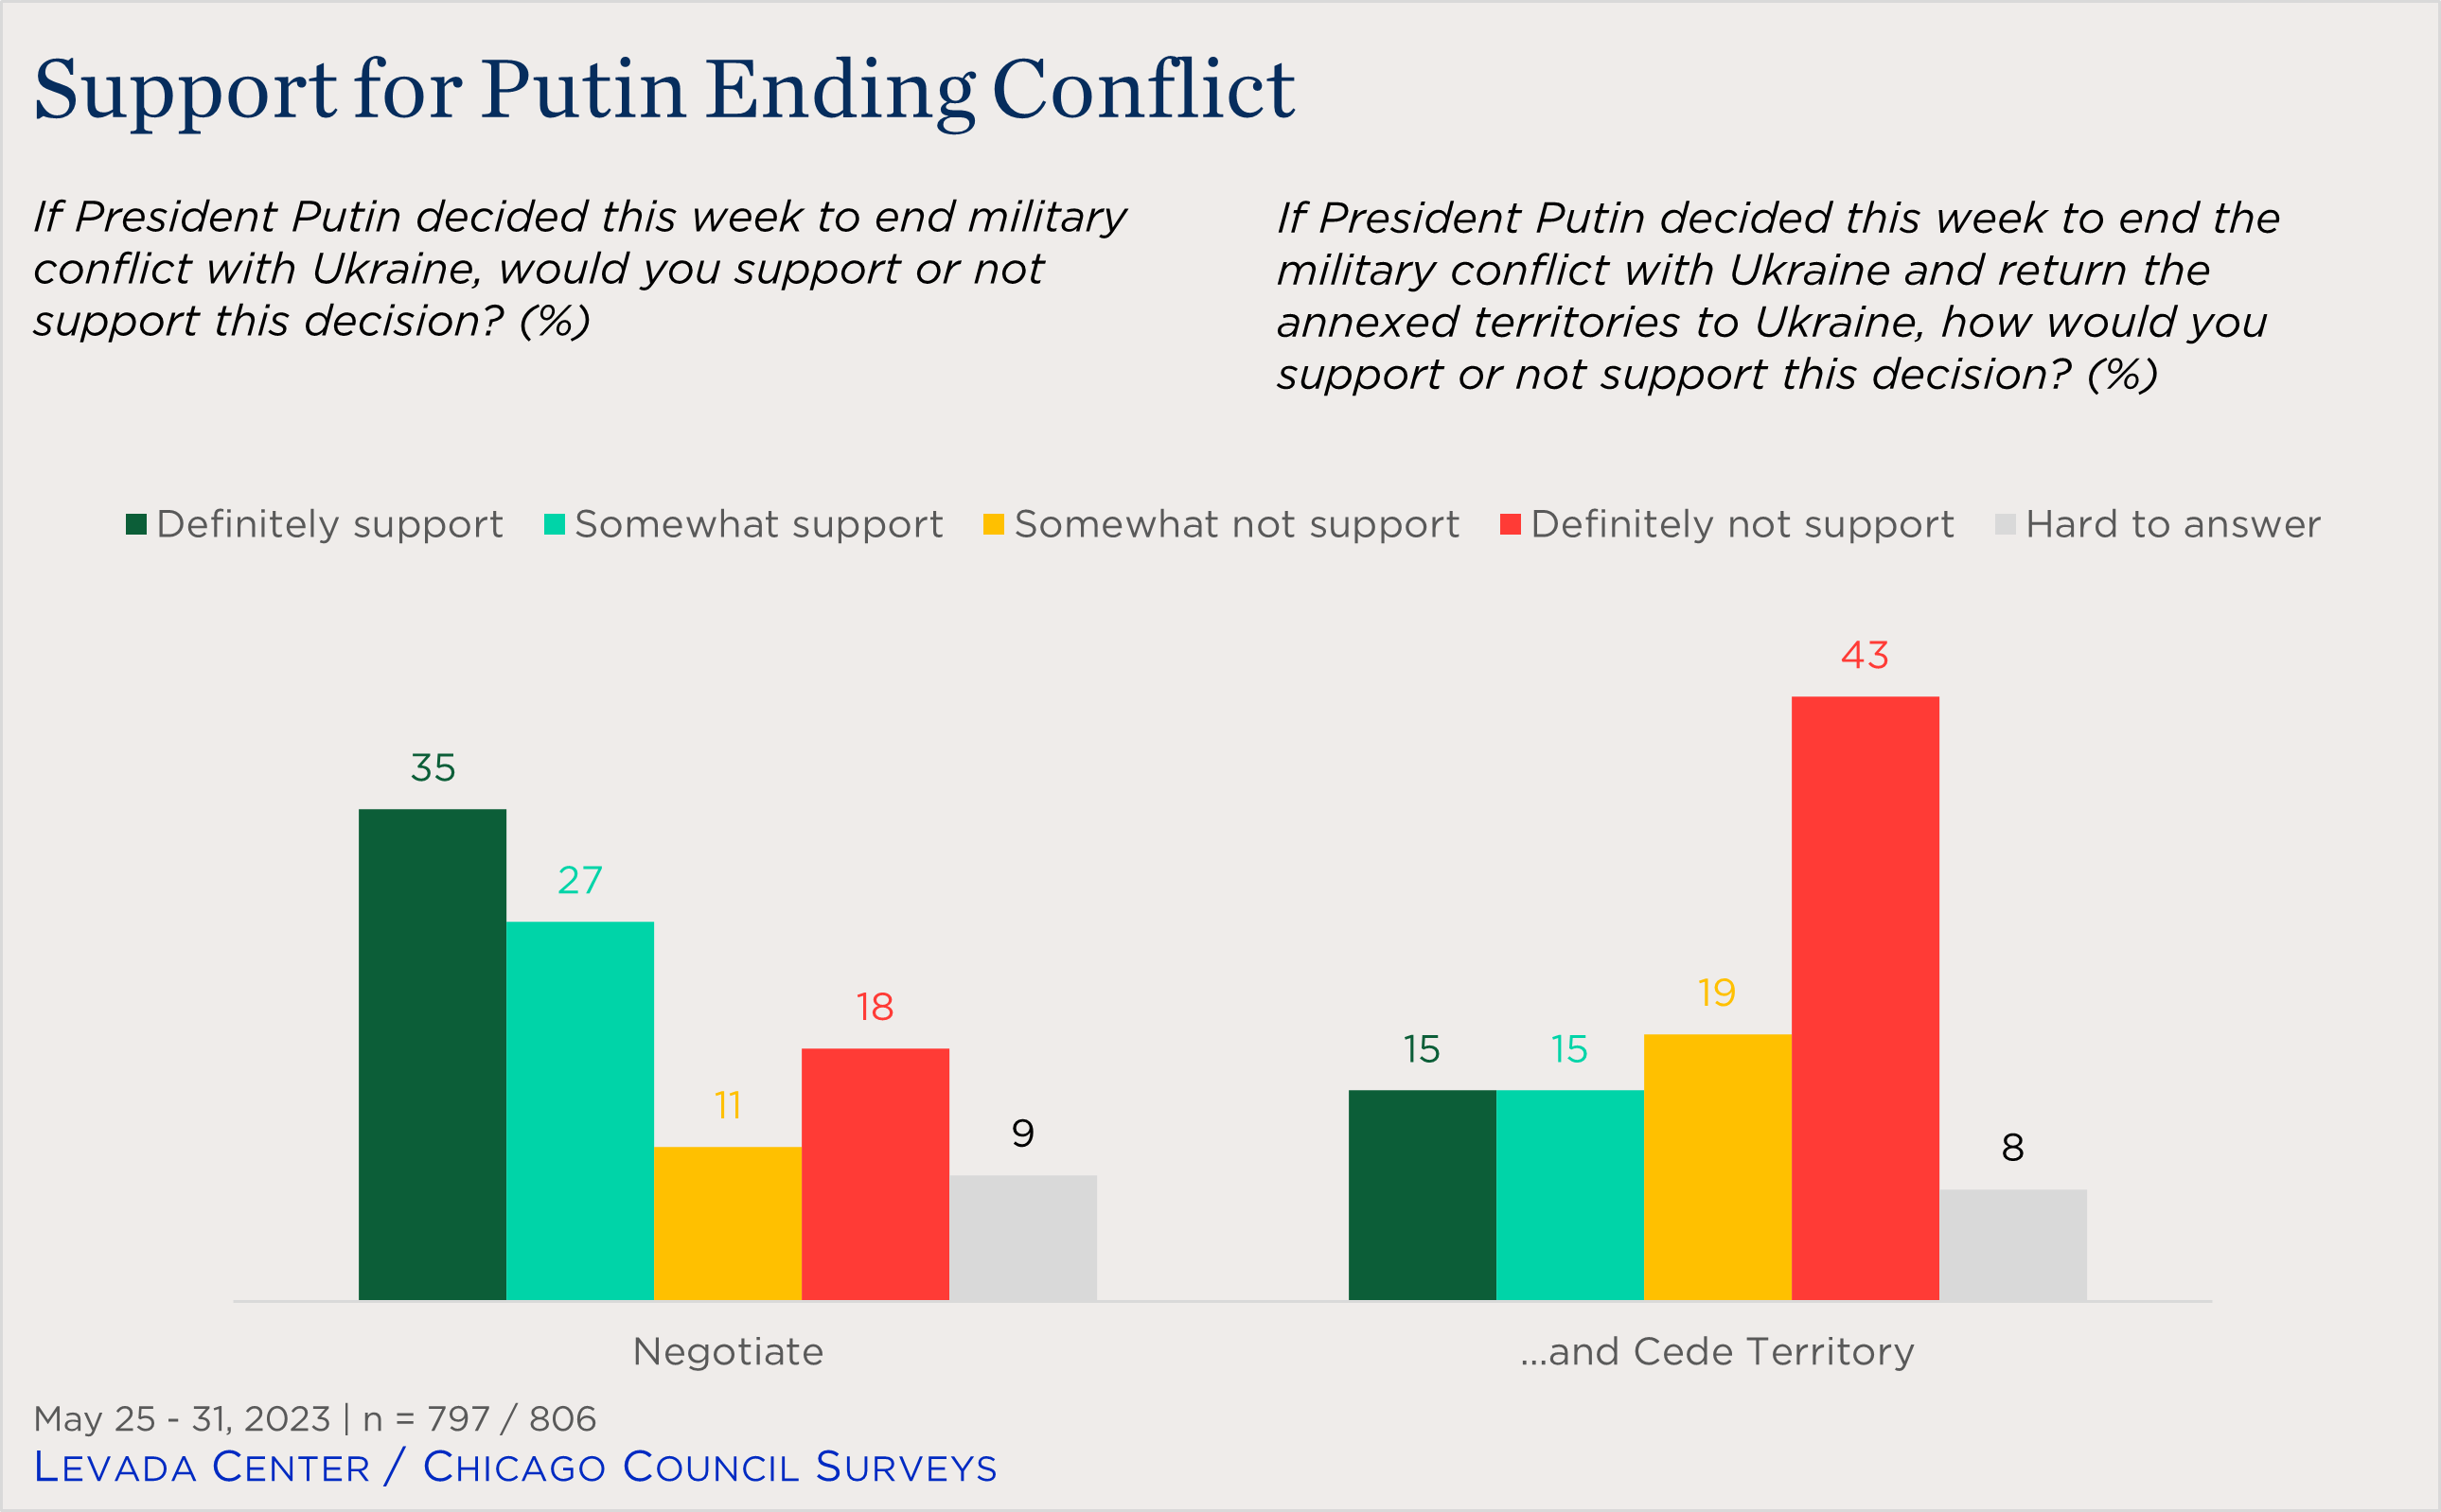 bar chart showing Russian support for Putin ending Ukraine conflict